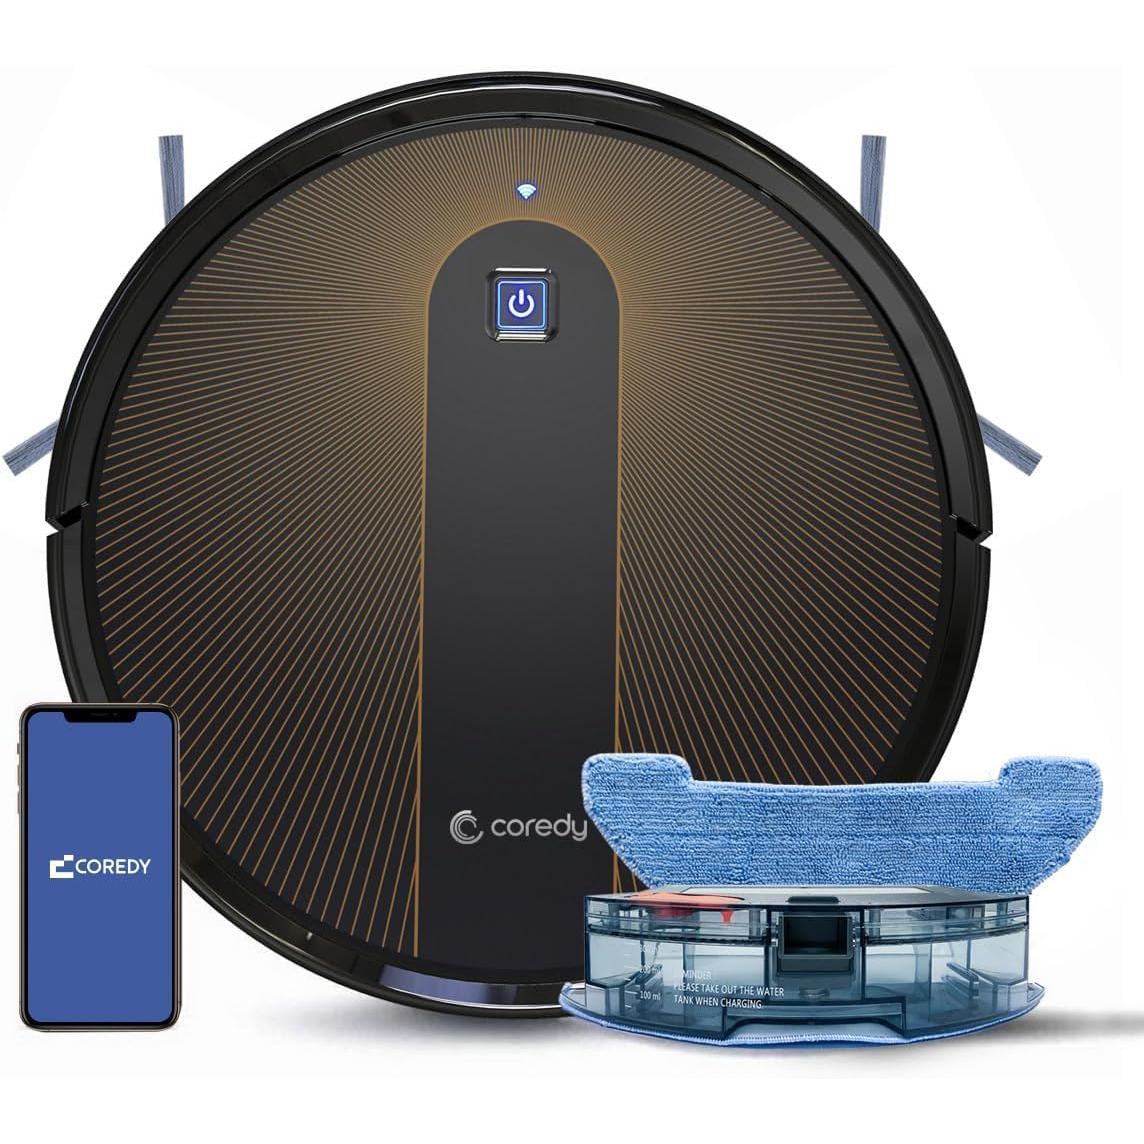 Coredy R750 Robot Vacuum Cleaner, Compatible with Alexa Mopping System